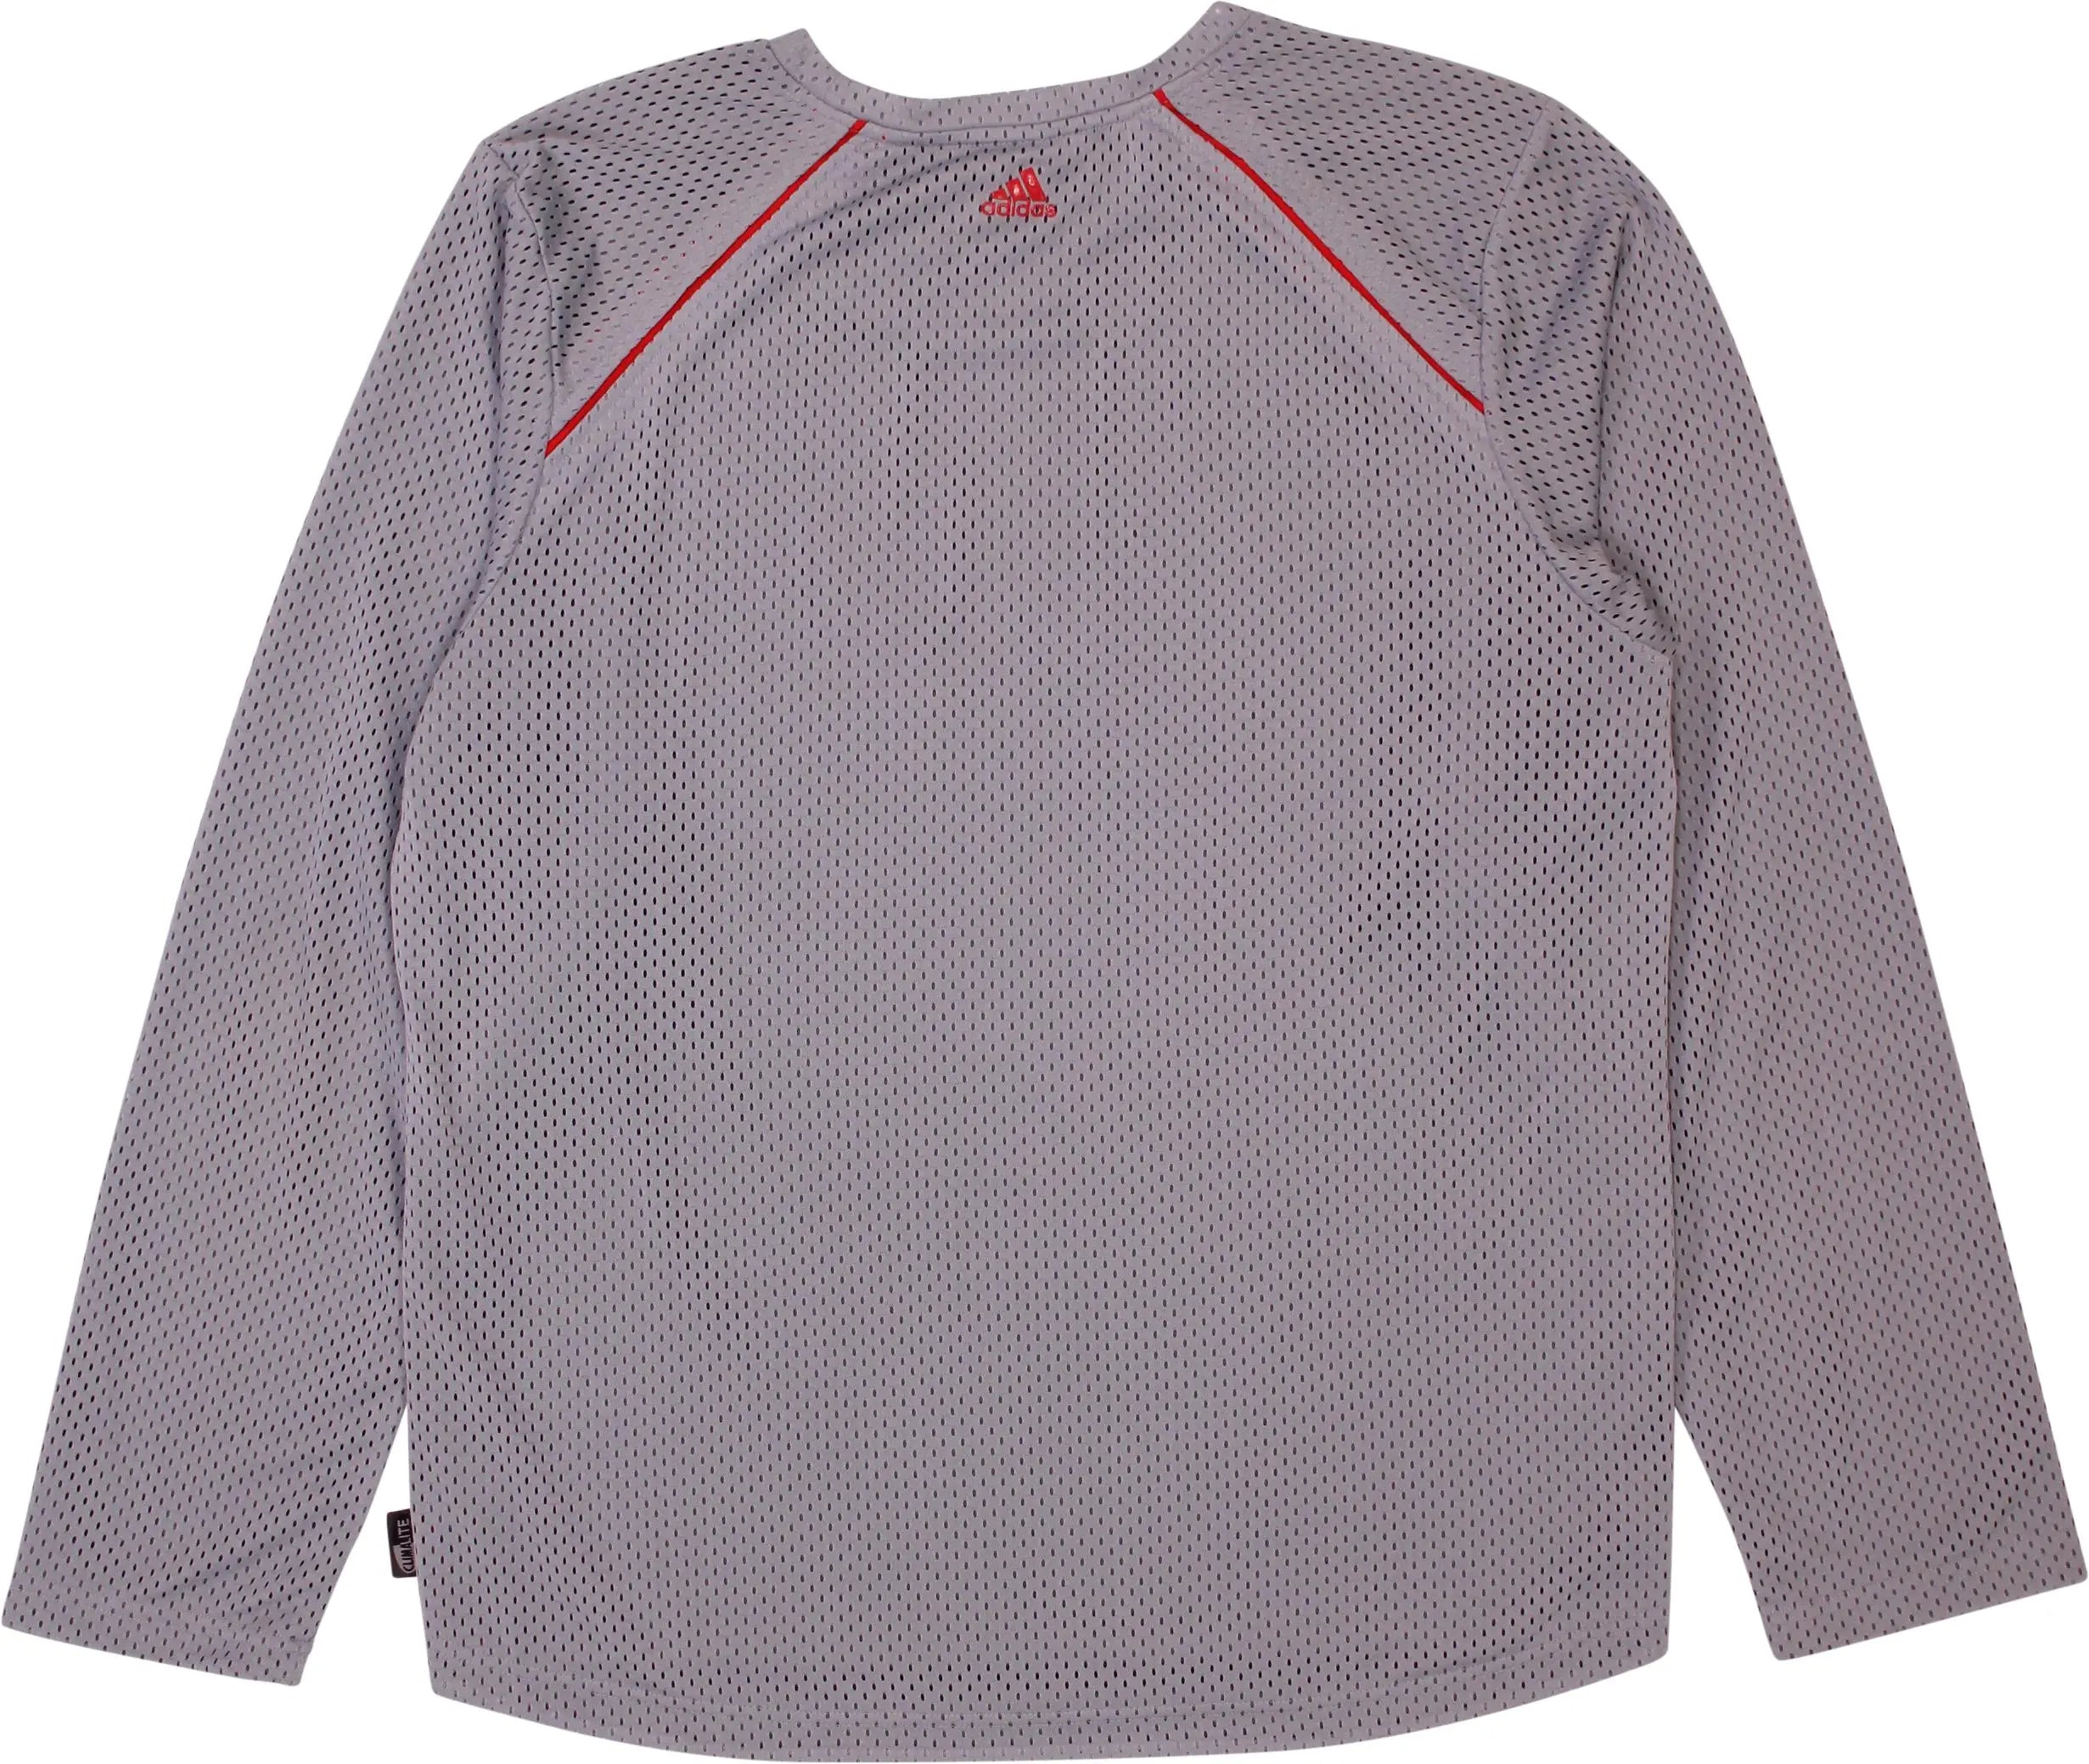 Adidas - Grey Sport Shirt by Adidas- ThriftTale.com - Vintage and second handclothing